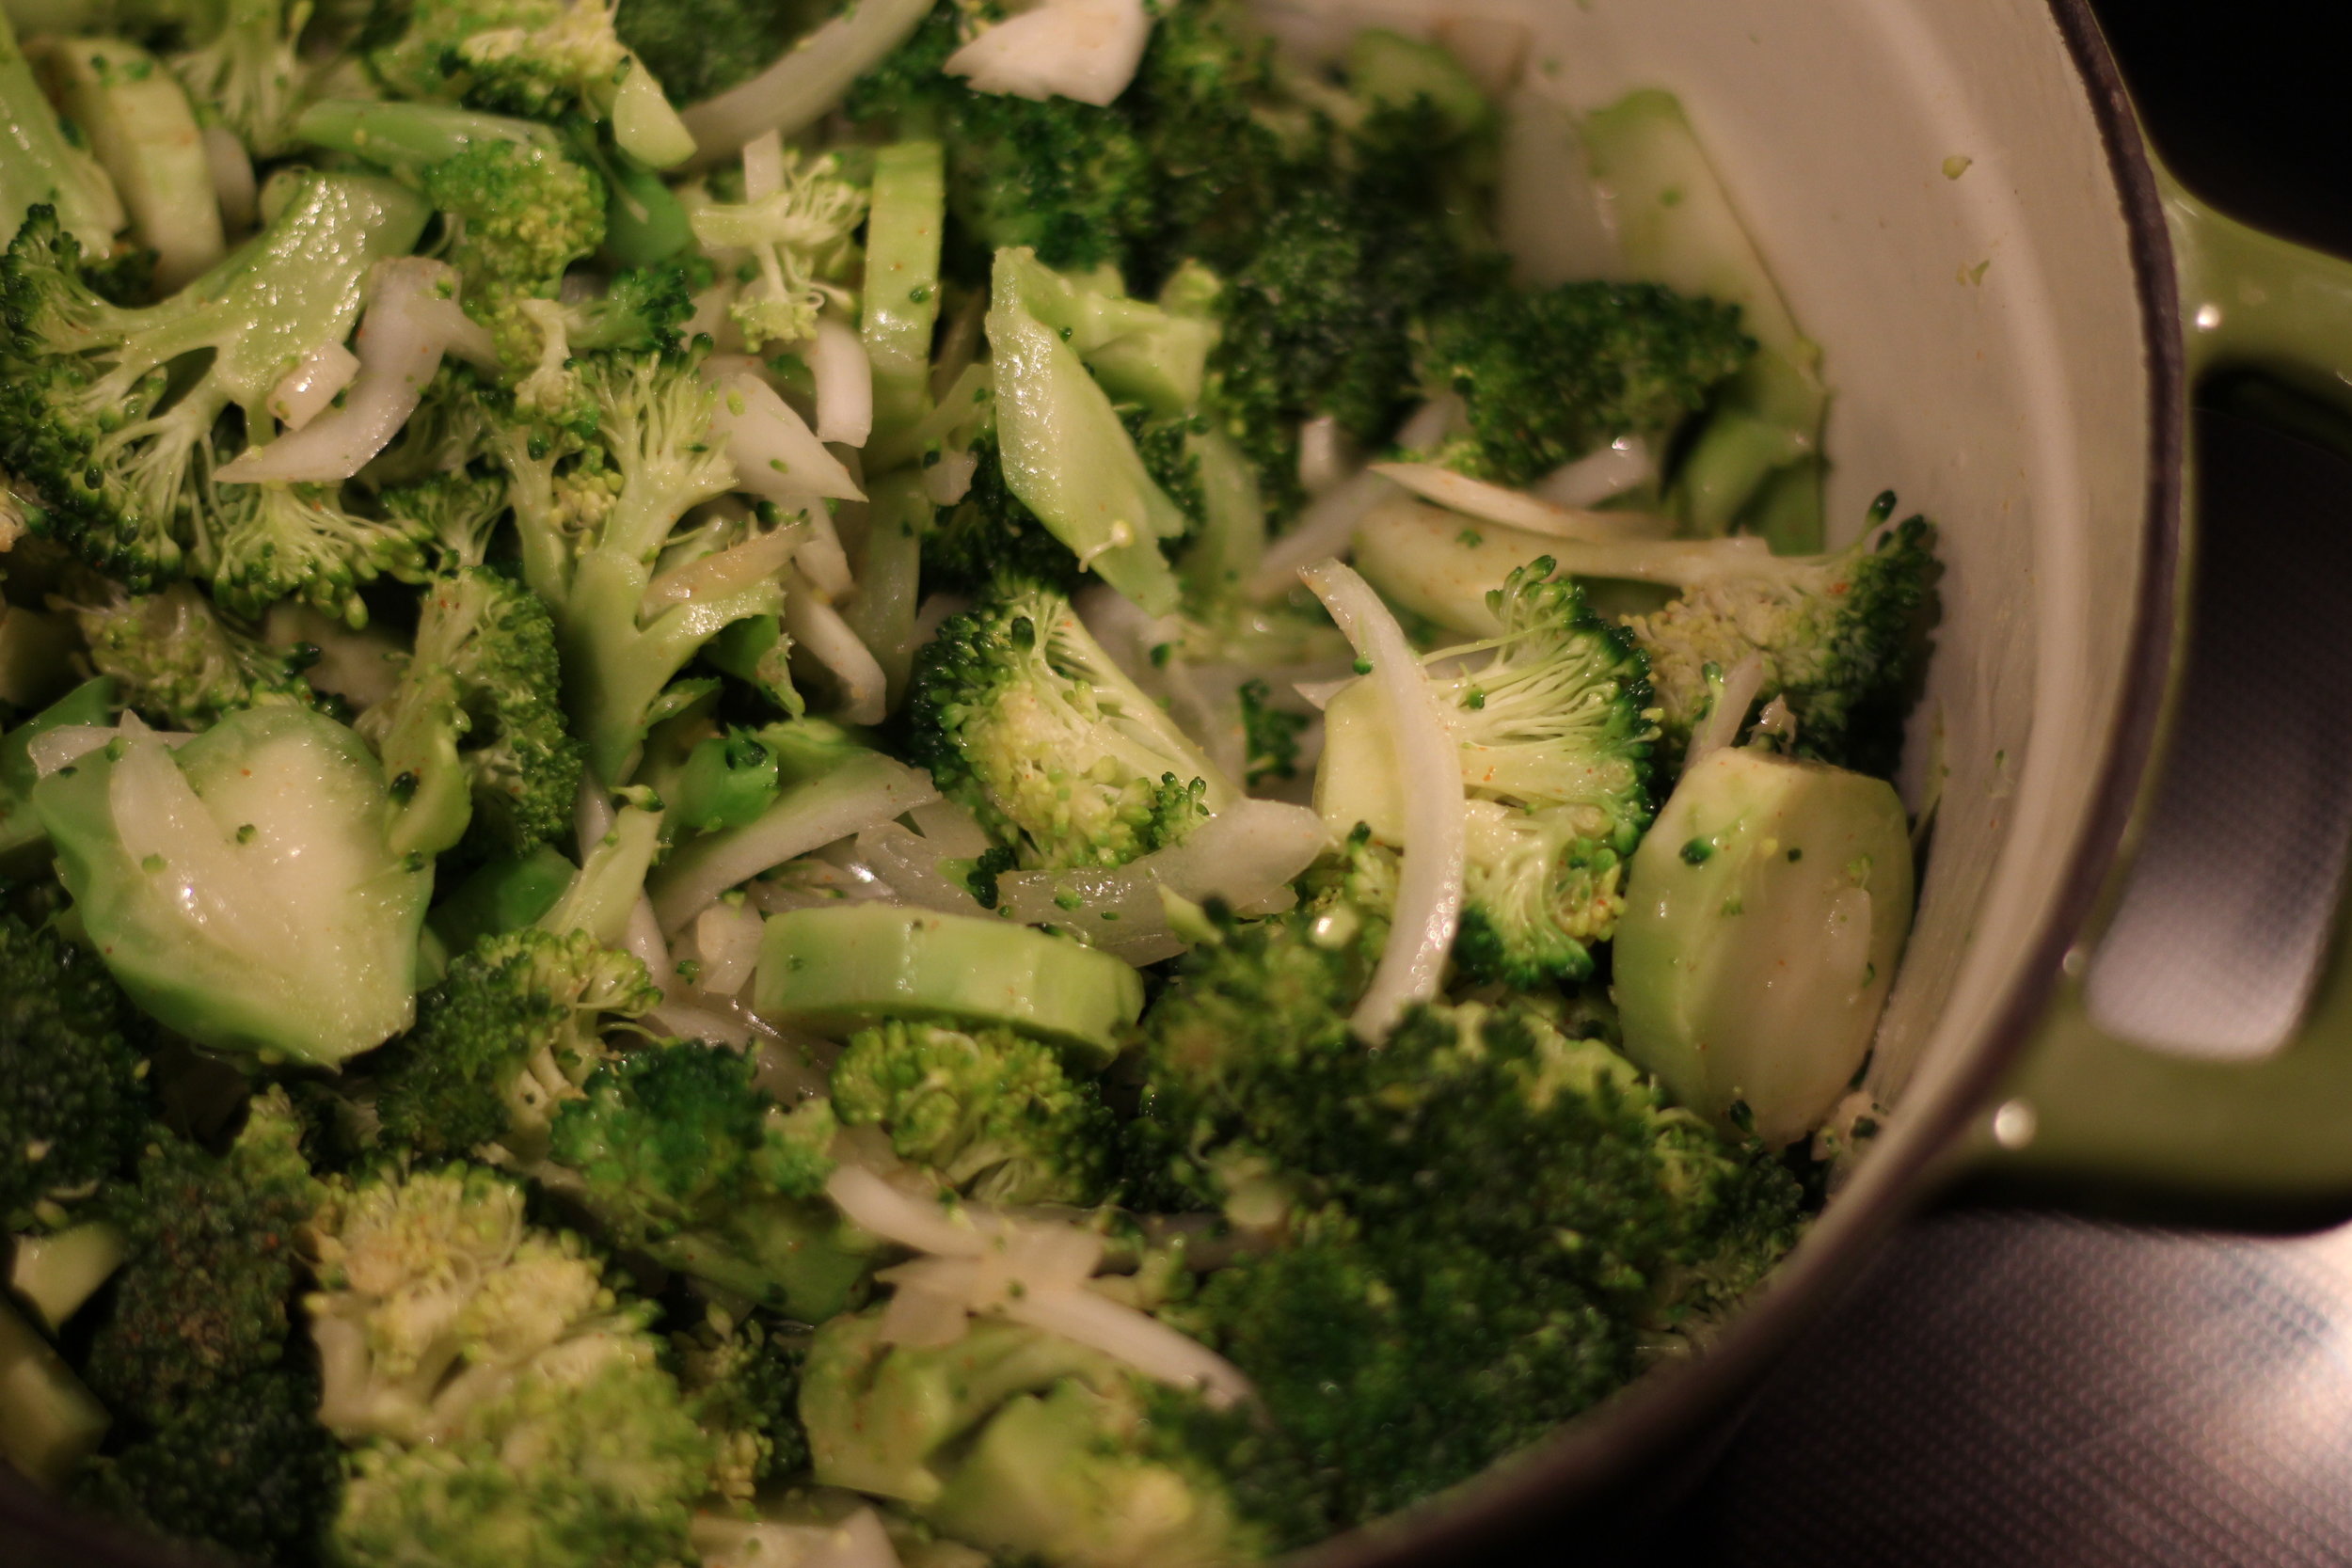  You're going to want to use ALL of the broccoli. Peeling the stalks and slicing them helps add a deep broccoli flavor. And you don't have to throw them away! 